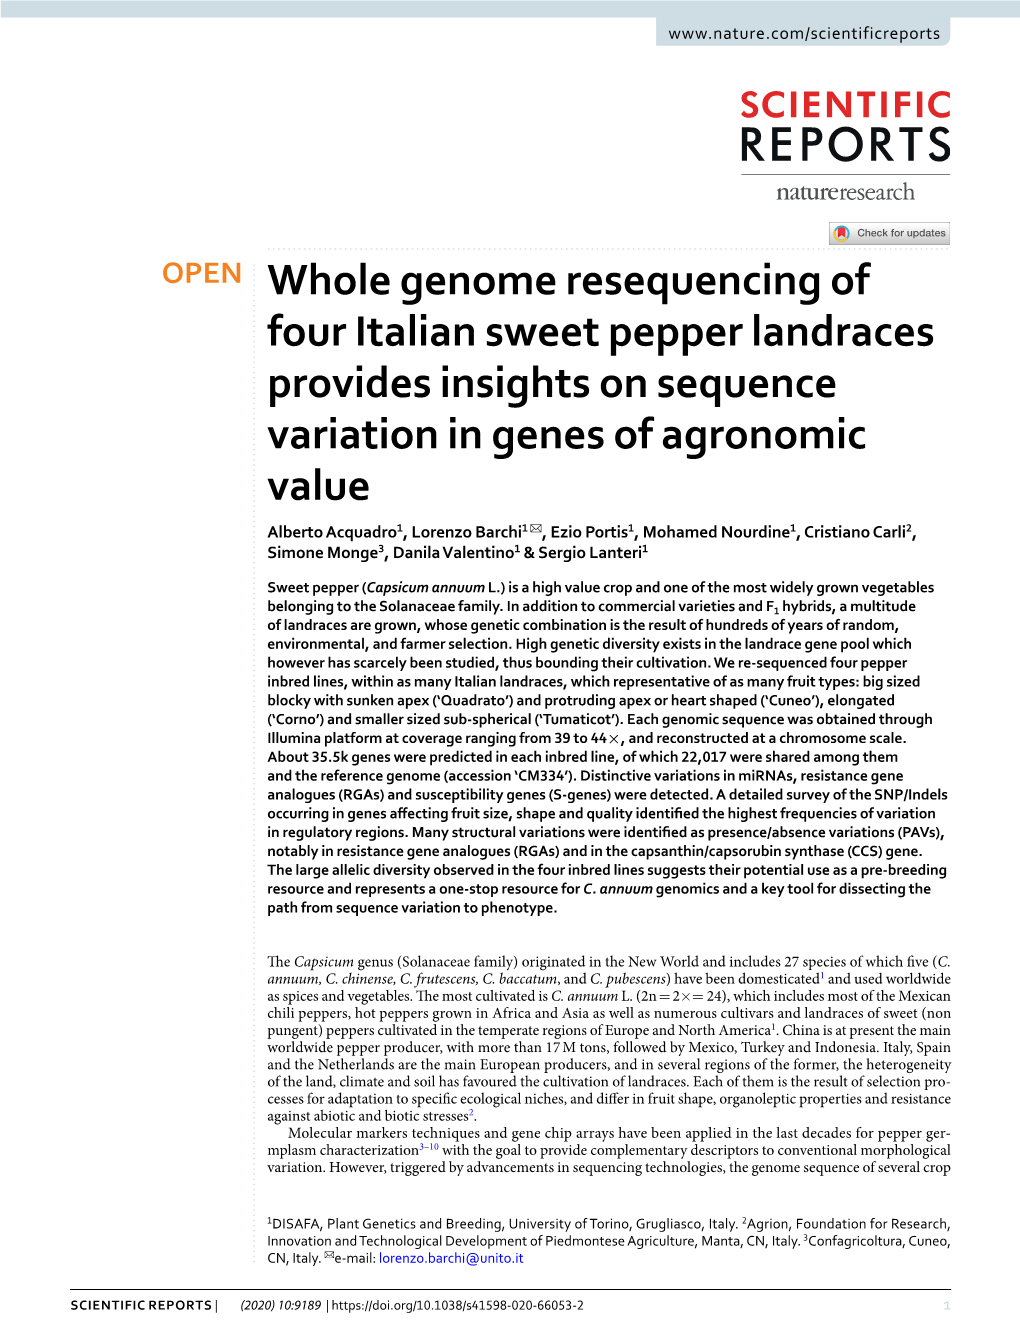 Whole Genome Resequencing of Four Italian Sweet Pepper Landraces Provides Insights on Sequence Variation in Genes of Agronomic V